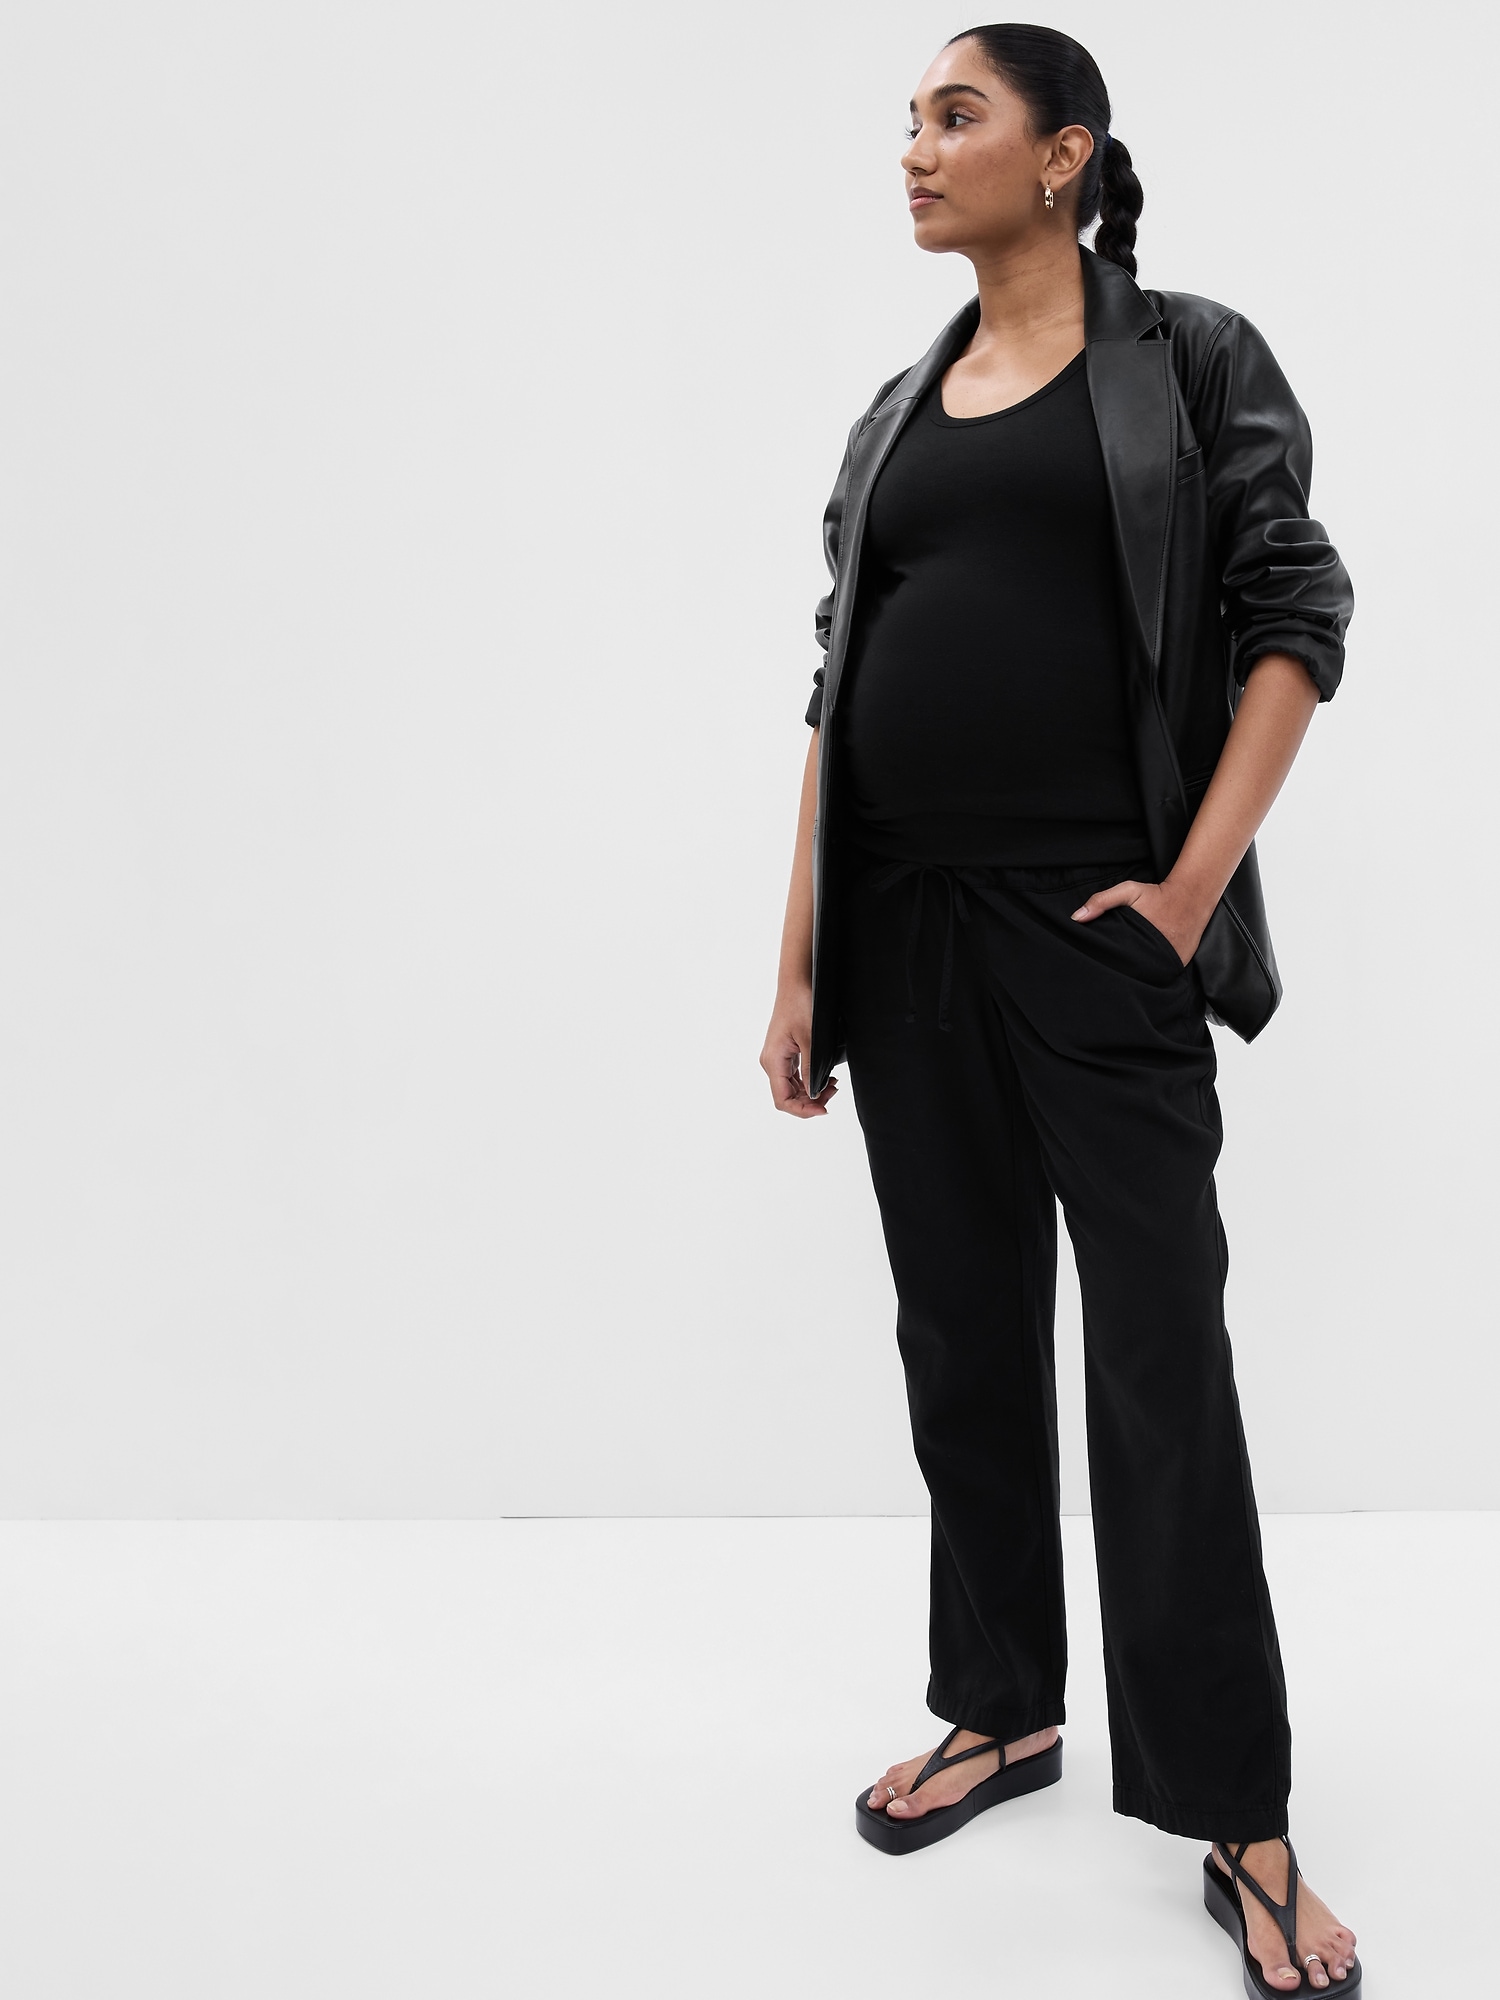 Plus-Size Clothing for Young Adult Women | Nordstrom